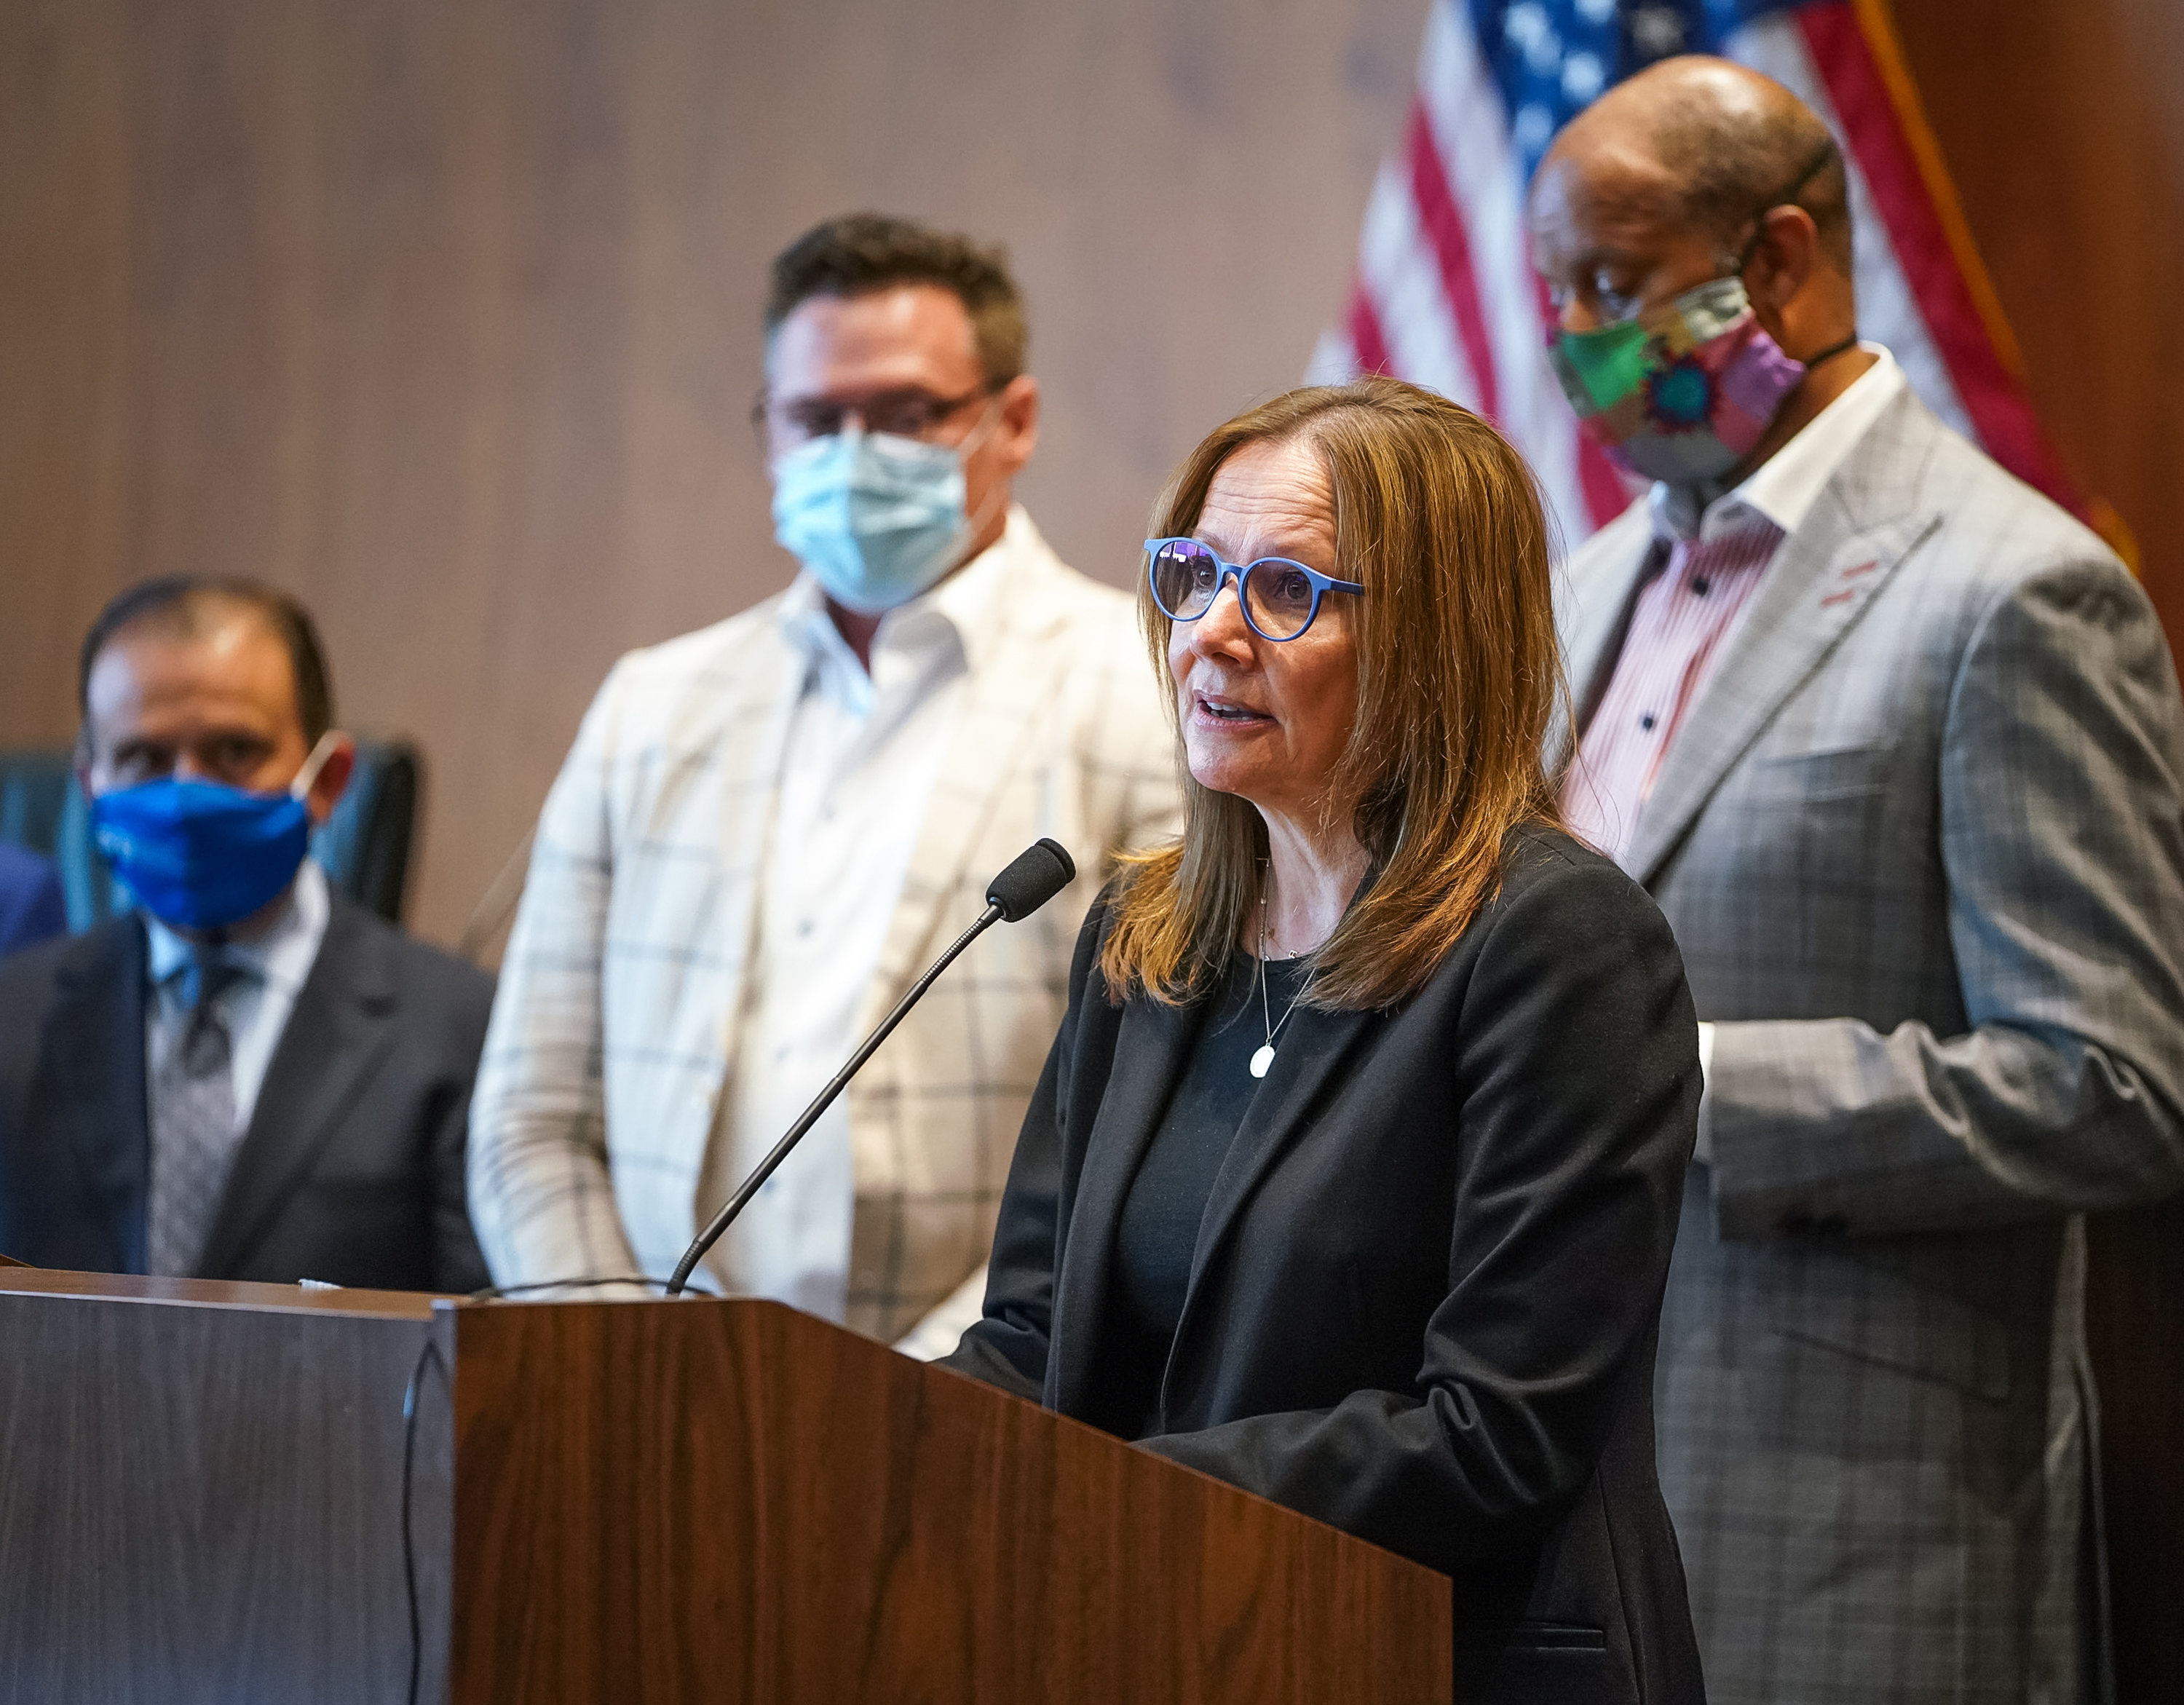 GM Chairman and CEO Mary Barra Speaks Out Against Racism and Injustice